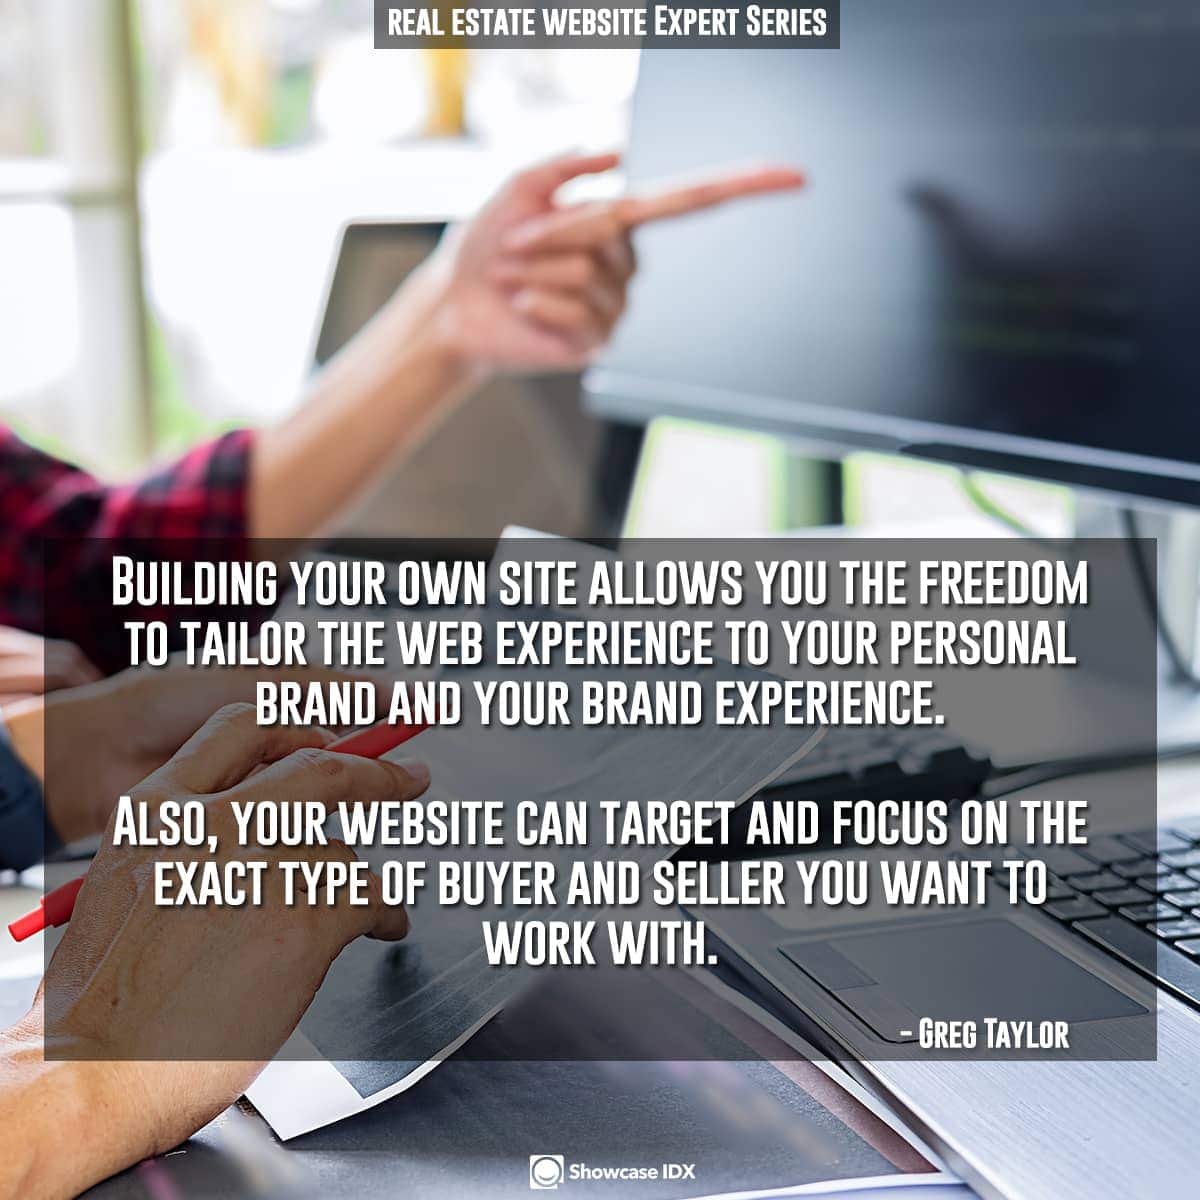 Building your own site allows you the freedom to tailor the web experience to your personal brand and your brand experience. Also, your website can target and focus on the exact type of buyer and seller you want to work with.